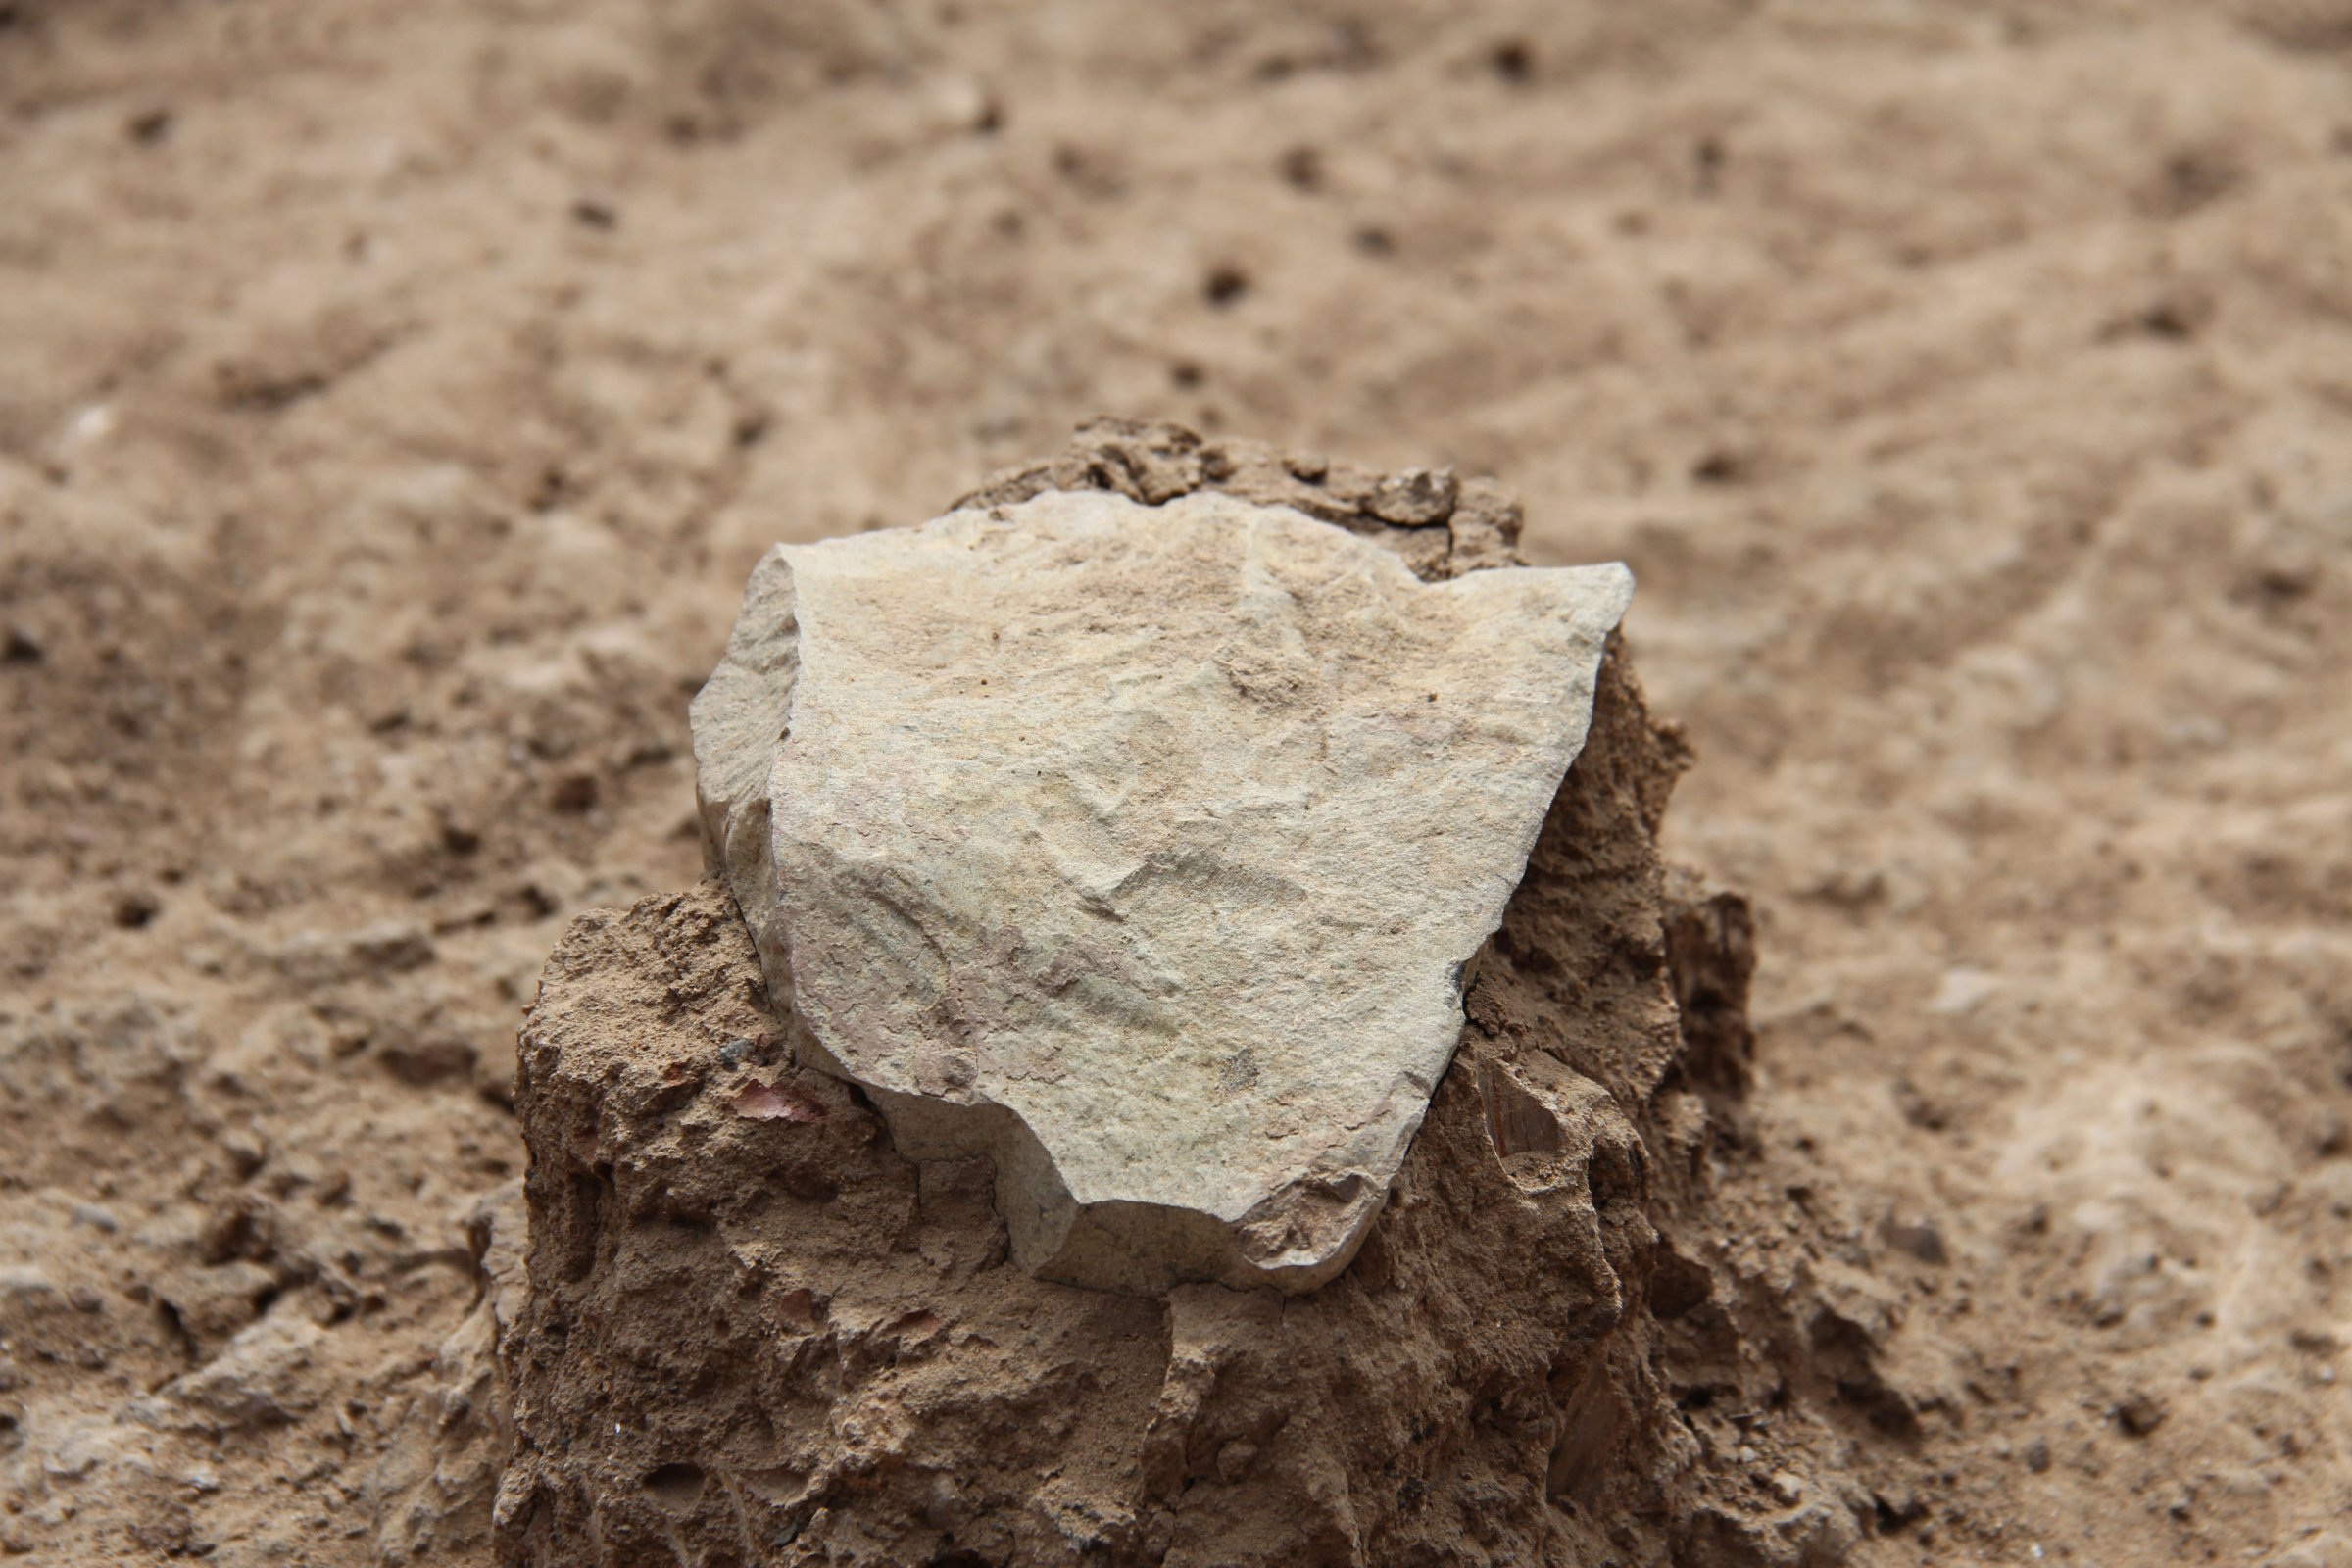 This undated photo made available May 20, 2015 by the Mission Prehistorique au Kenya - West Turkana Archaeological Project shows the excavation of a stone tool found in the West Turkana area of Kenya.